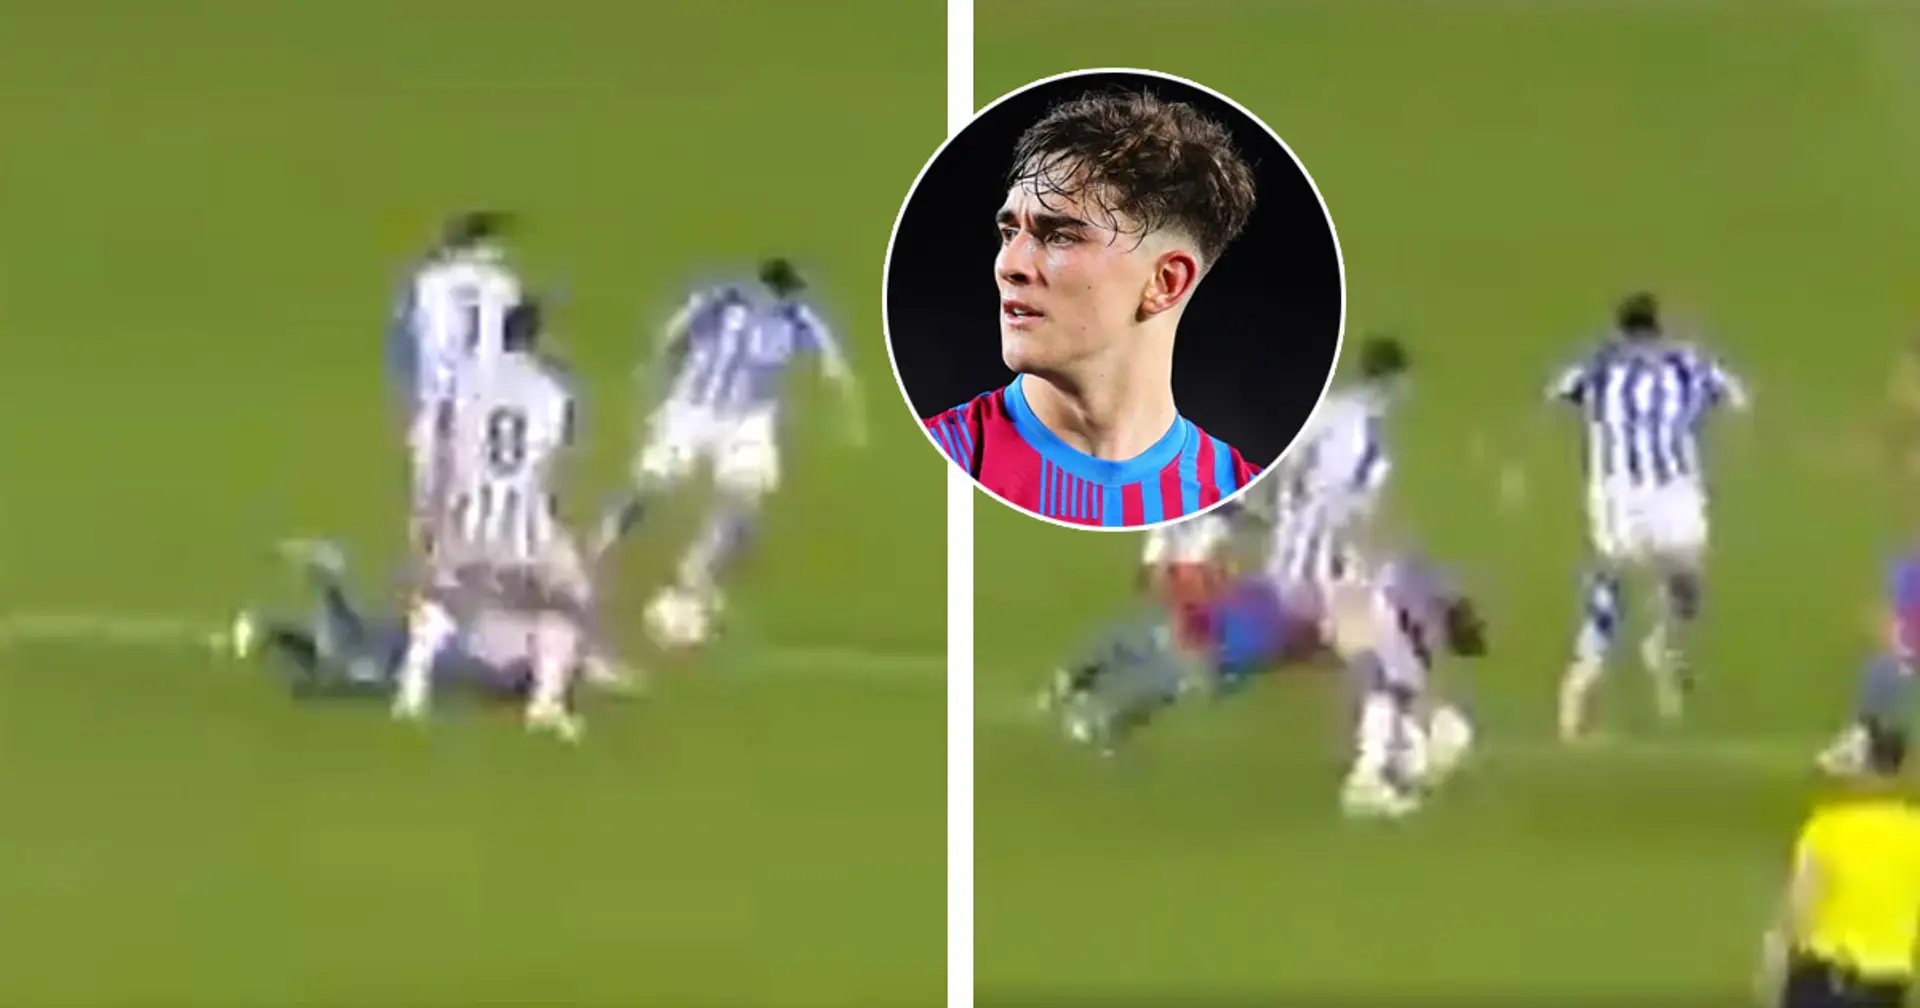 Spotted: Gavi tries to tackle Real Sociedad player with his head while on the ground